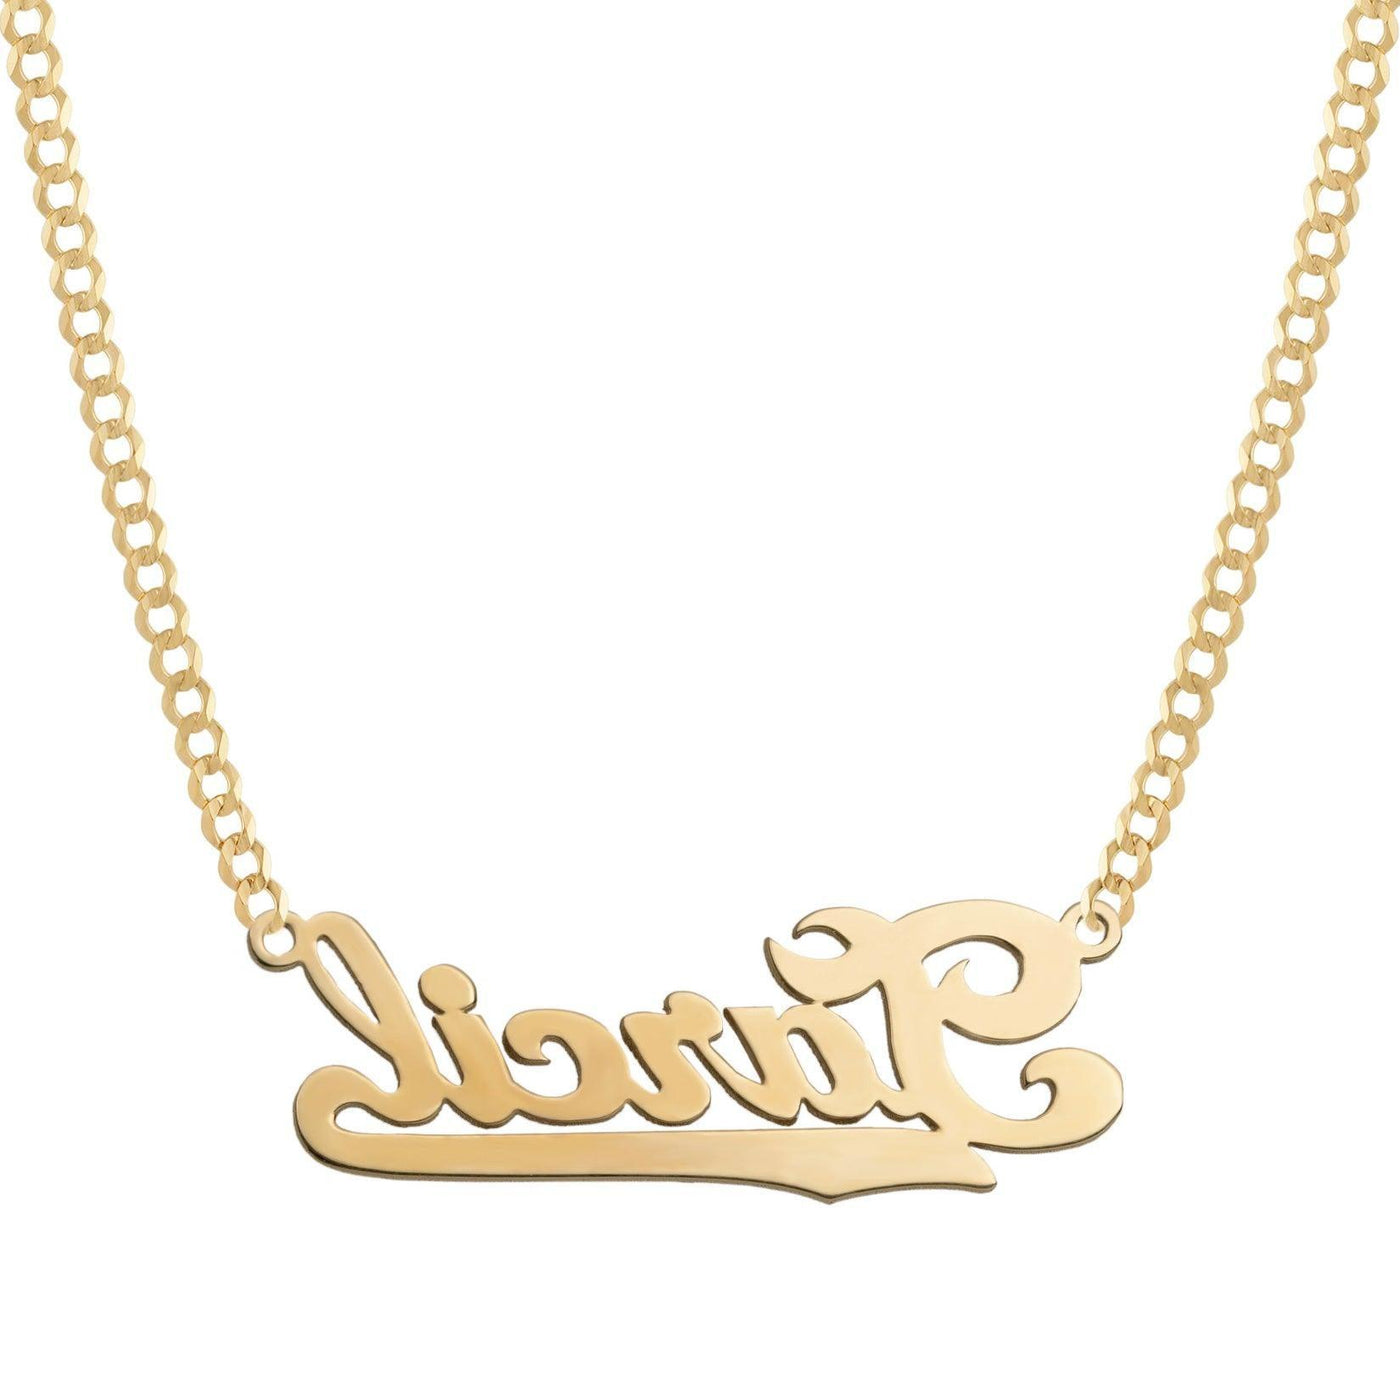 Ladies Script Name Plate Necklace 14K Gold - Style 120 - bayamjewelry